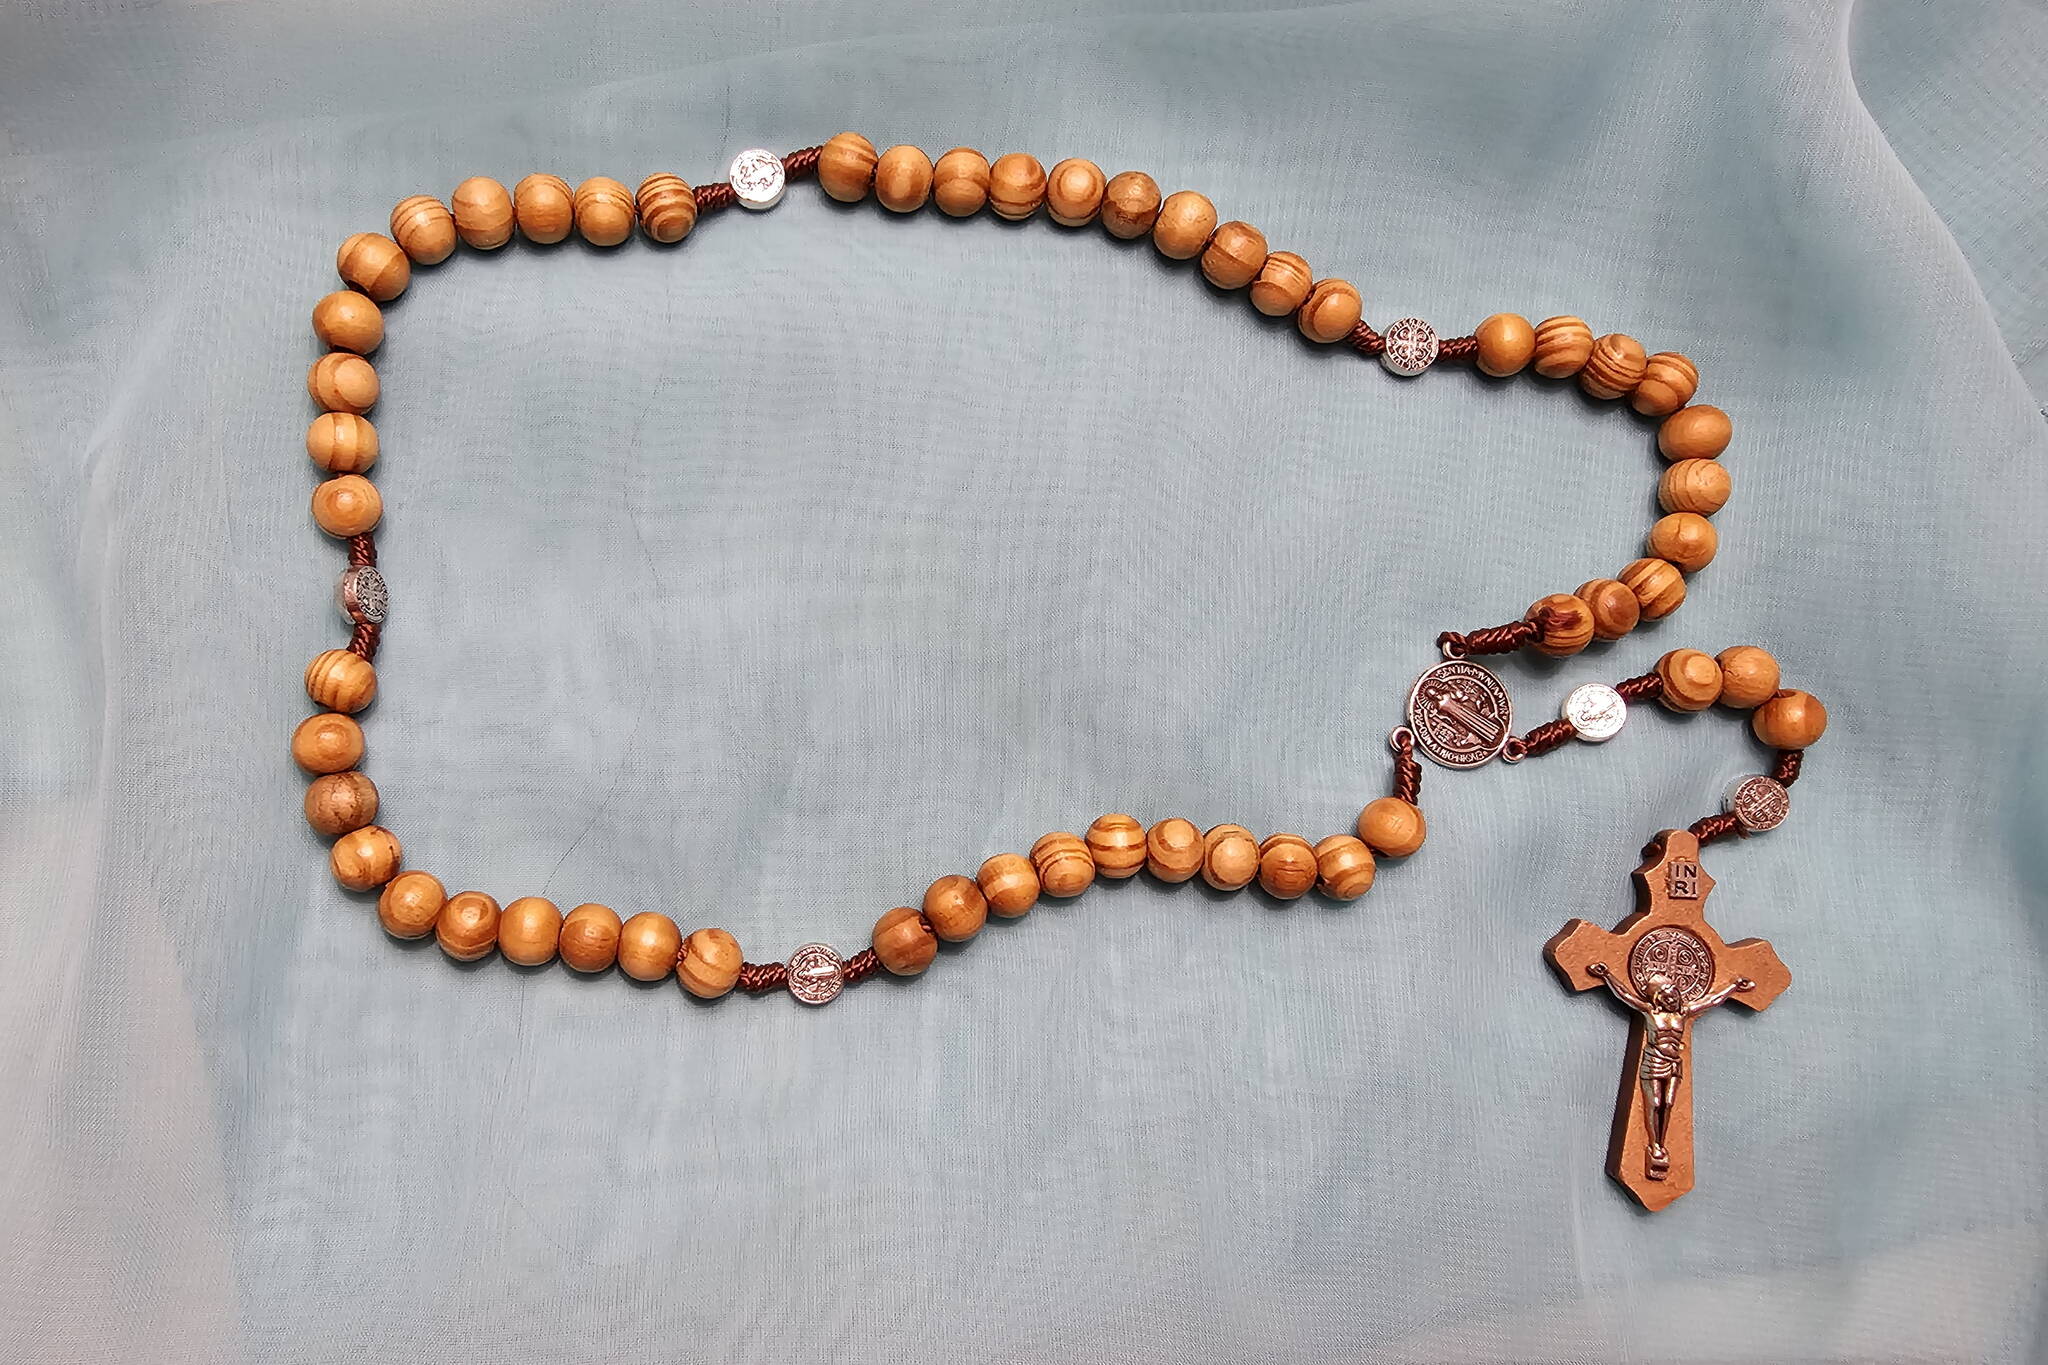 A rosary the author got during a pilgrimage to the Holy Land in 2018. (Photo by Gina Del Rosario)